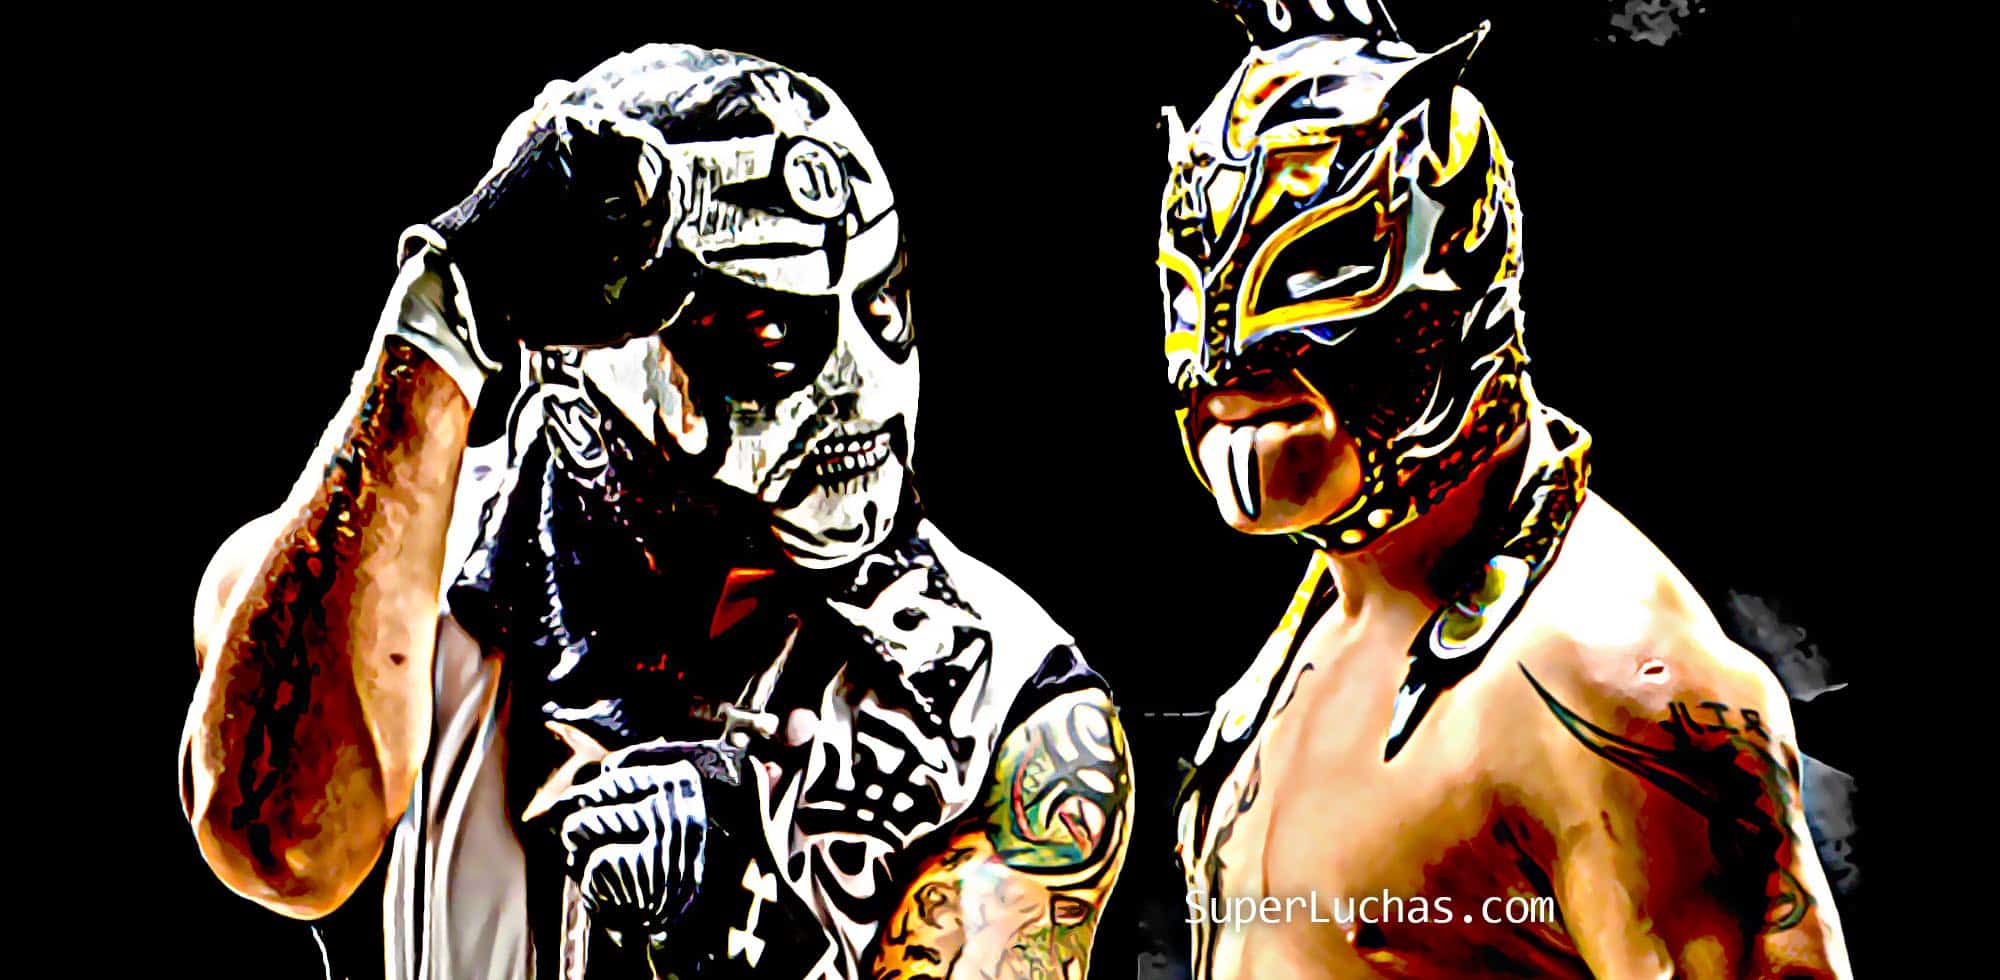 Two more to the cast: Pentagón Jr. and Rey Fénix have signed